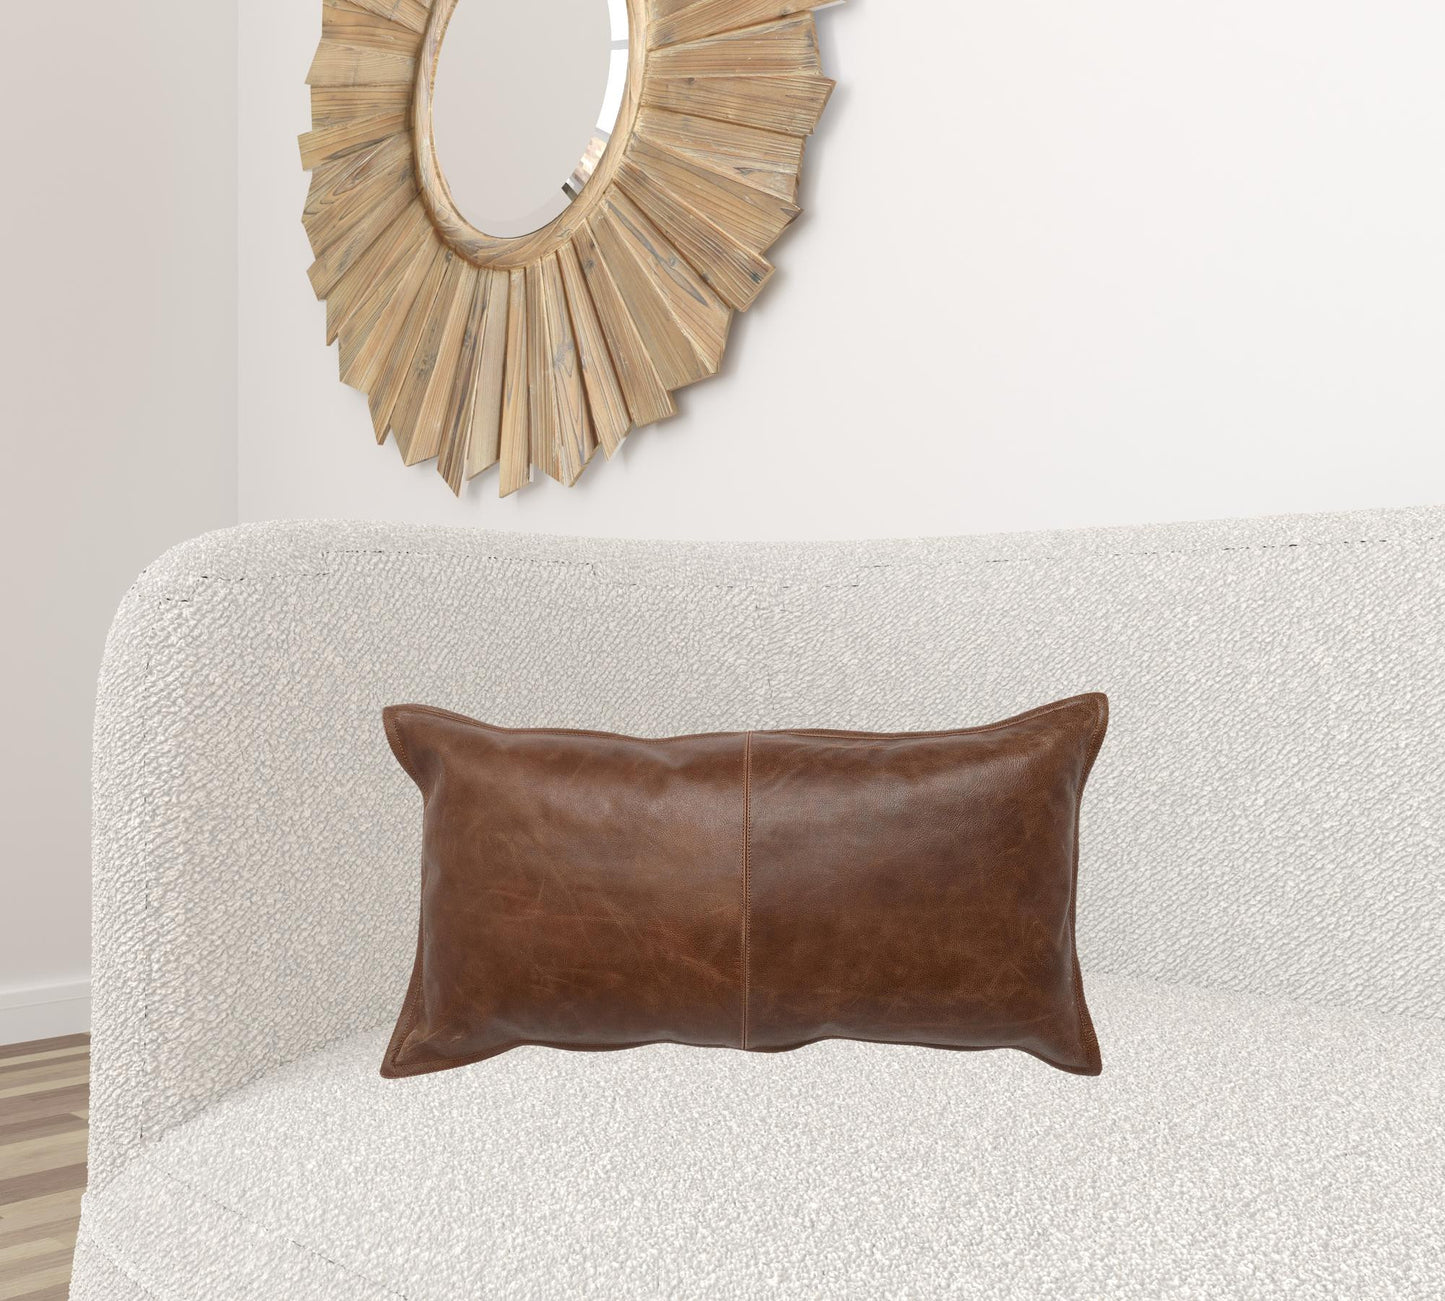 14" X 26" Brown Leather Zippered Pillow